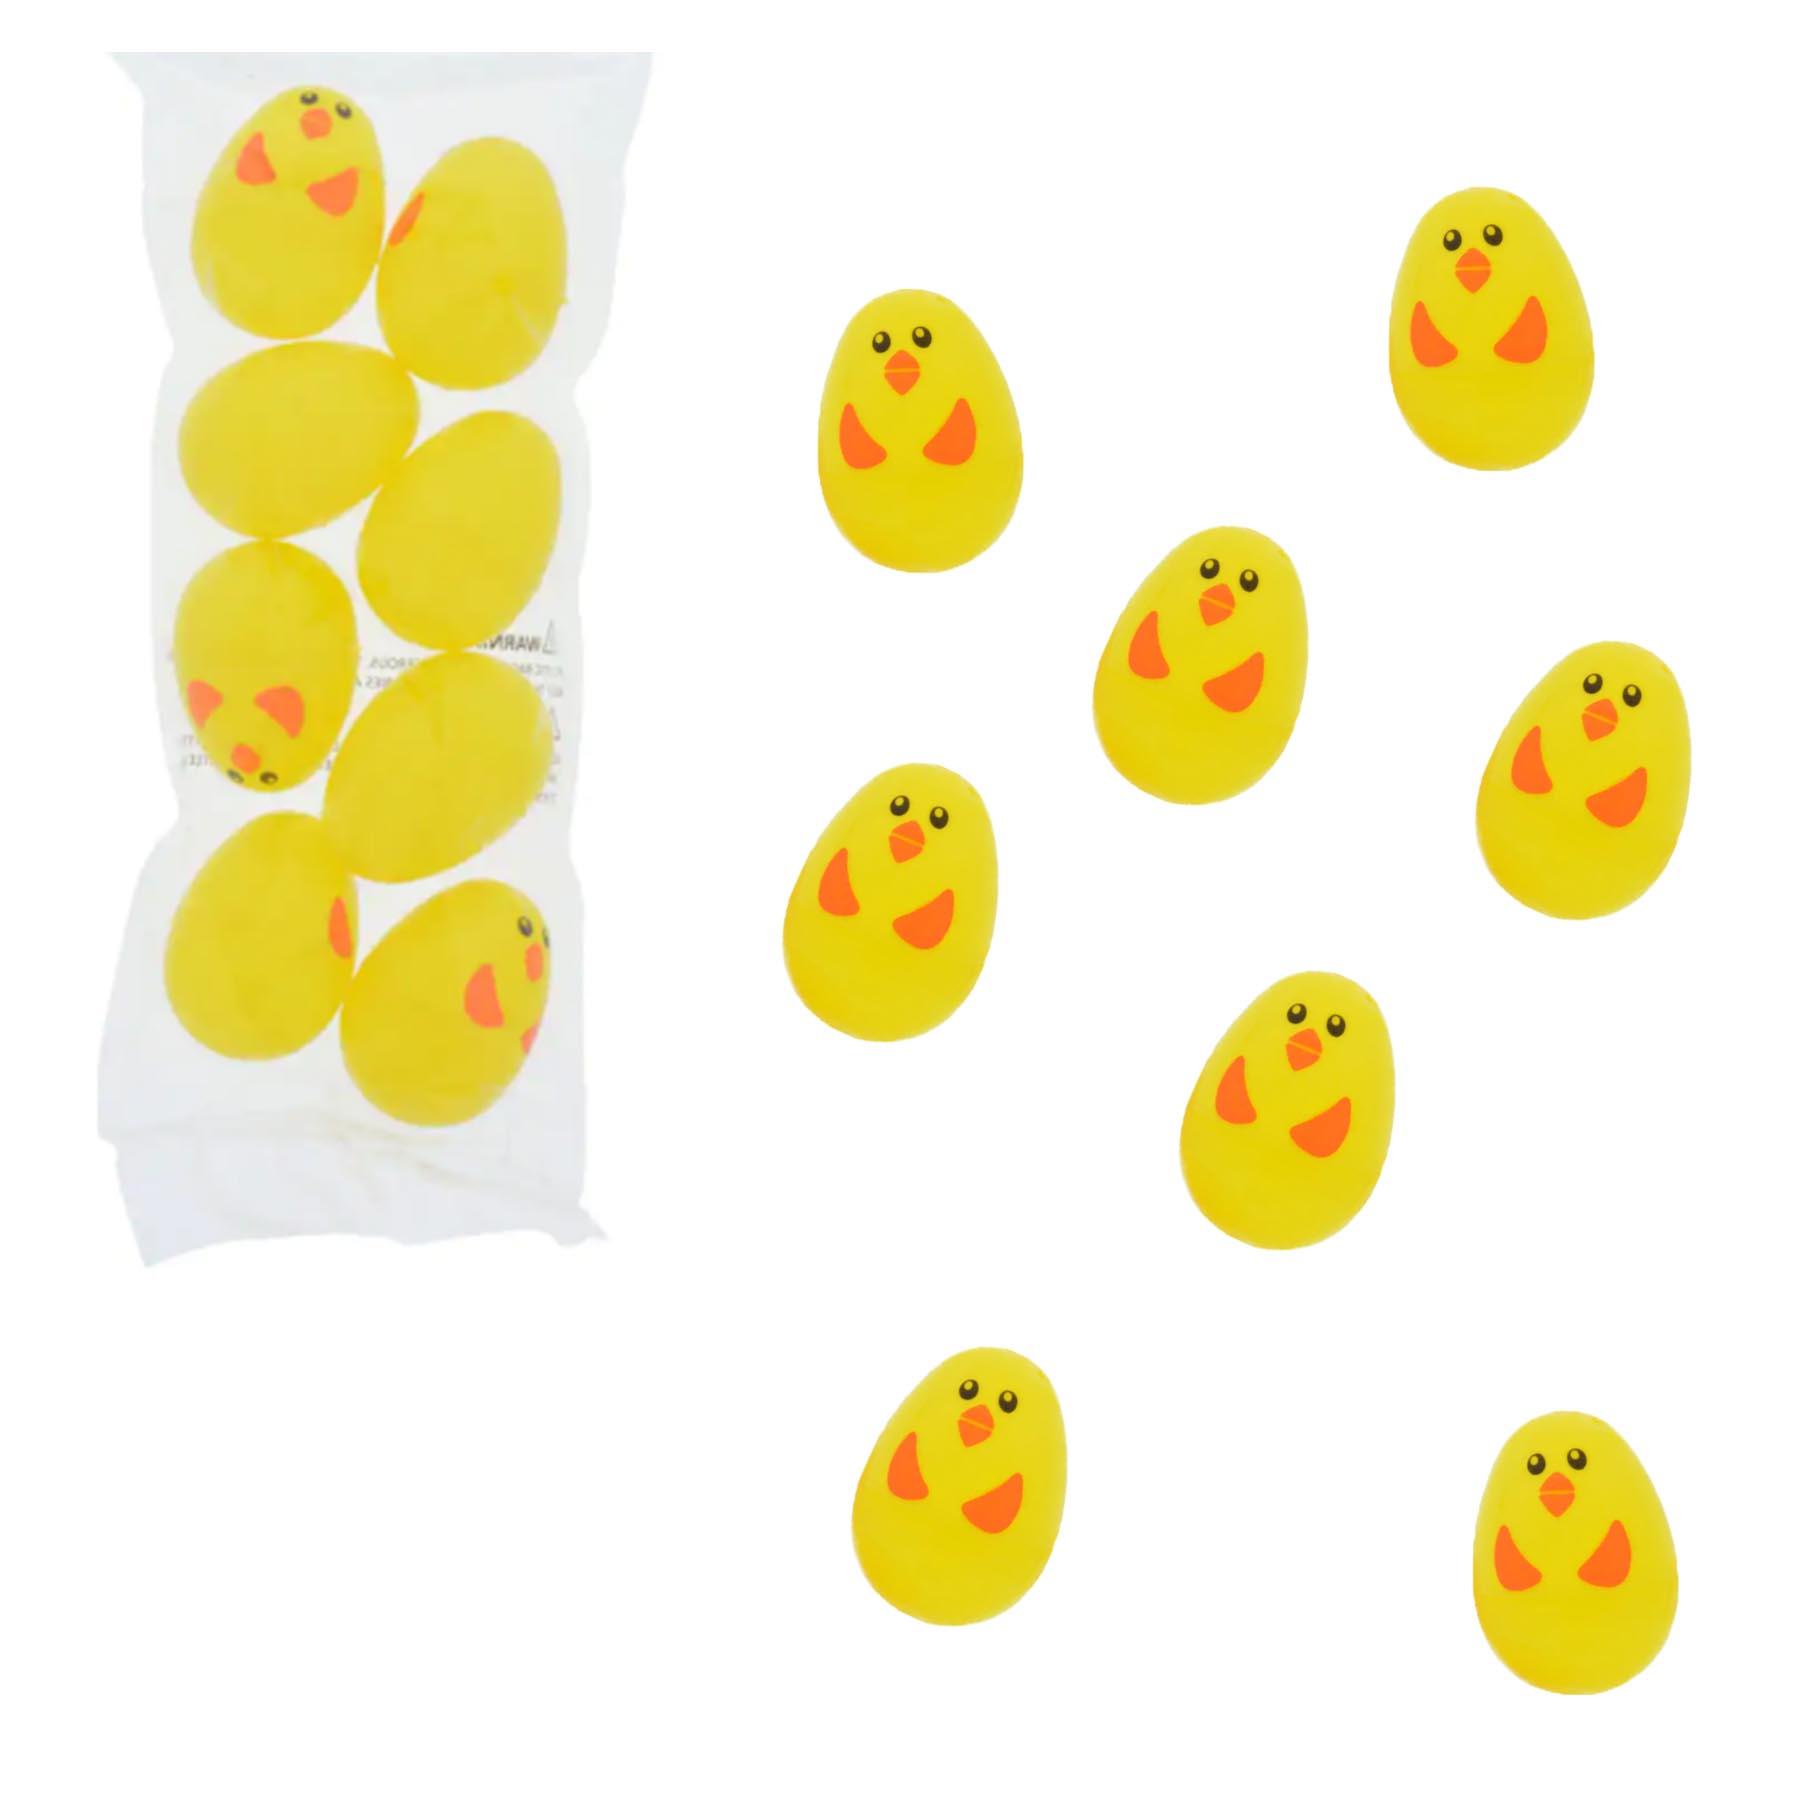 Easter Egg Hunt Accessories and Games - 8 Pack Fillable Chick Eggs